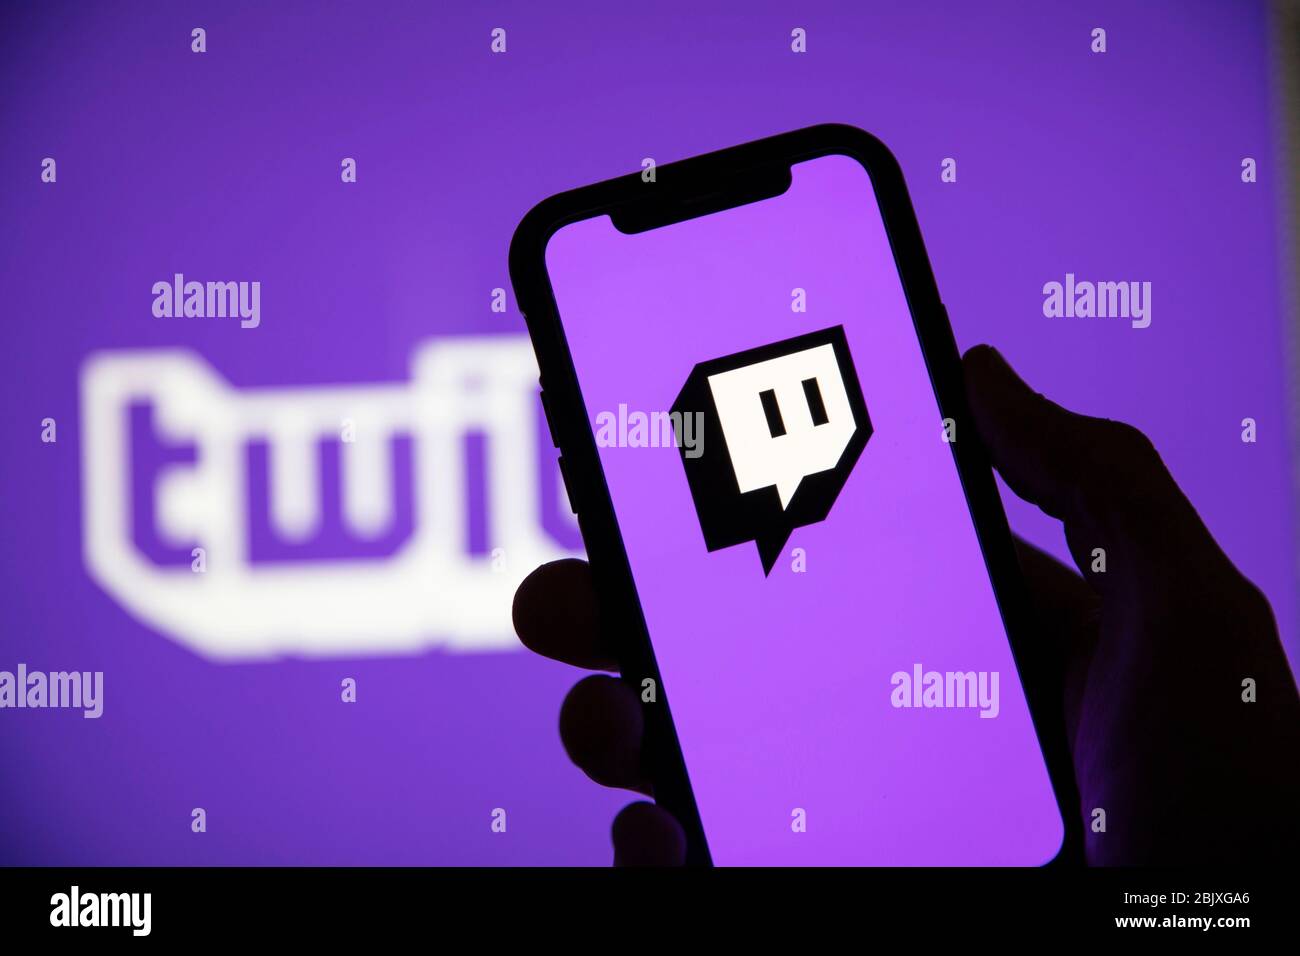 LONDON, UK - April 30 2020: Twitch game live streaming logo on a smartphone Stock Photo